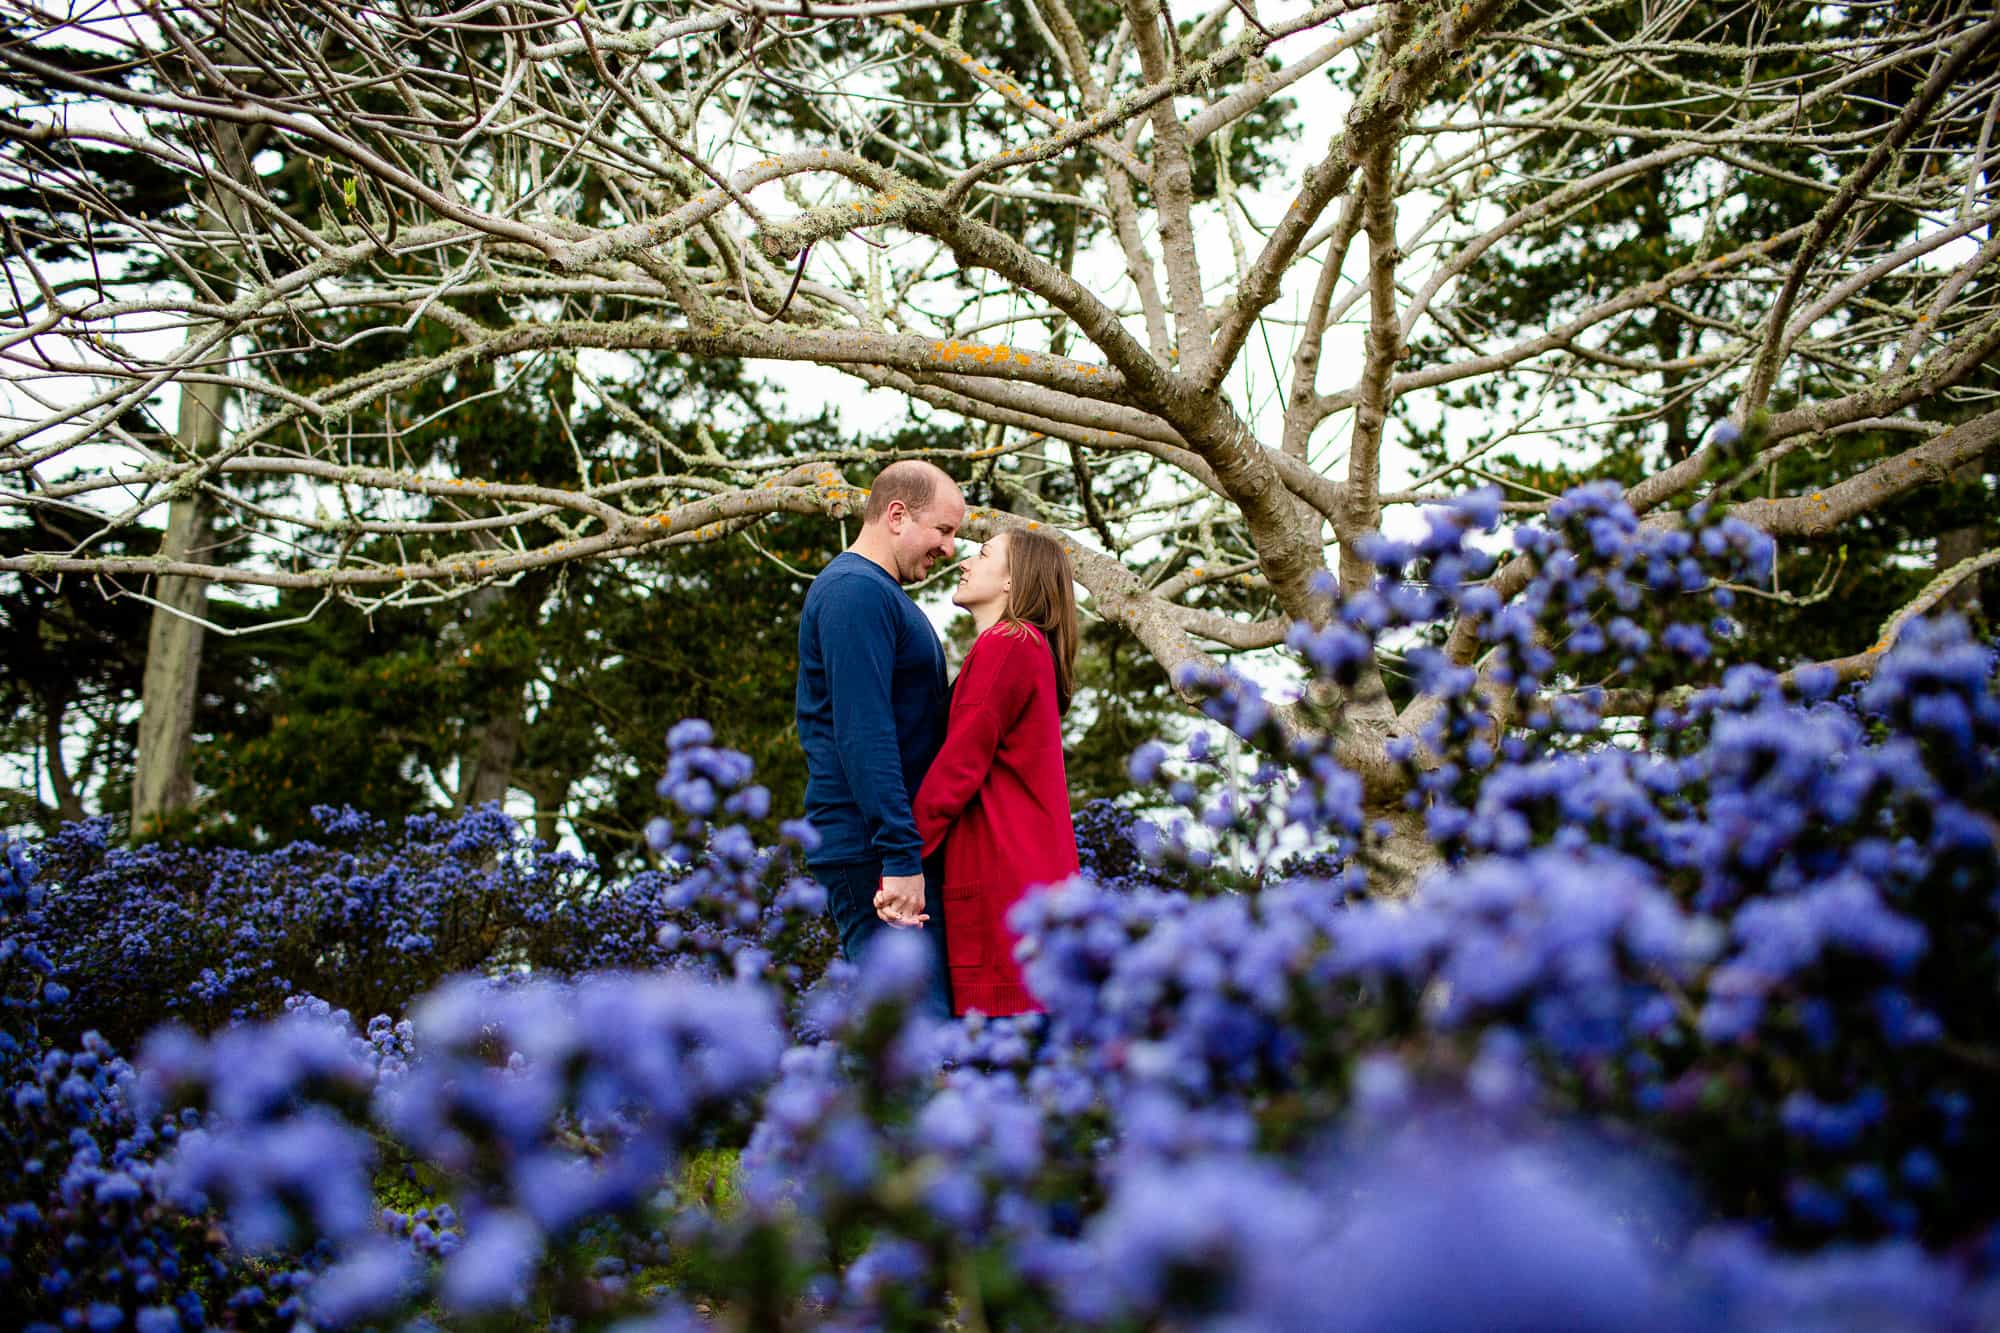 Man and woman standing close and looking at each other surrounded by purple flowers and a tree with no leaves on it